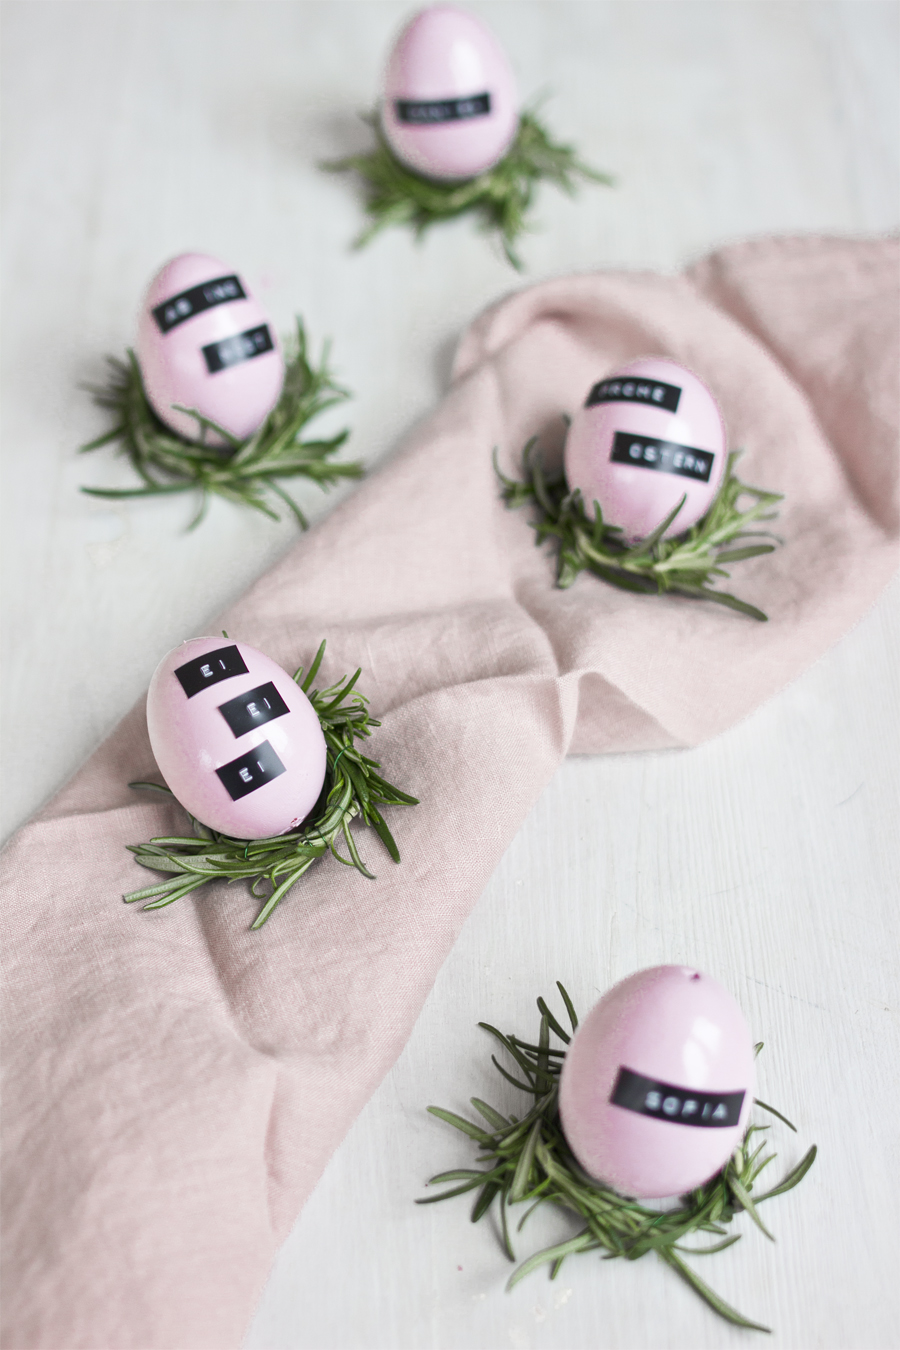 DIY Easter table decoration idea | LOOK WHAT I MADE ...